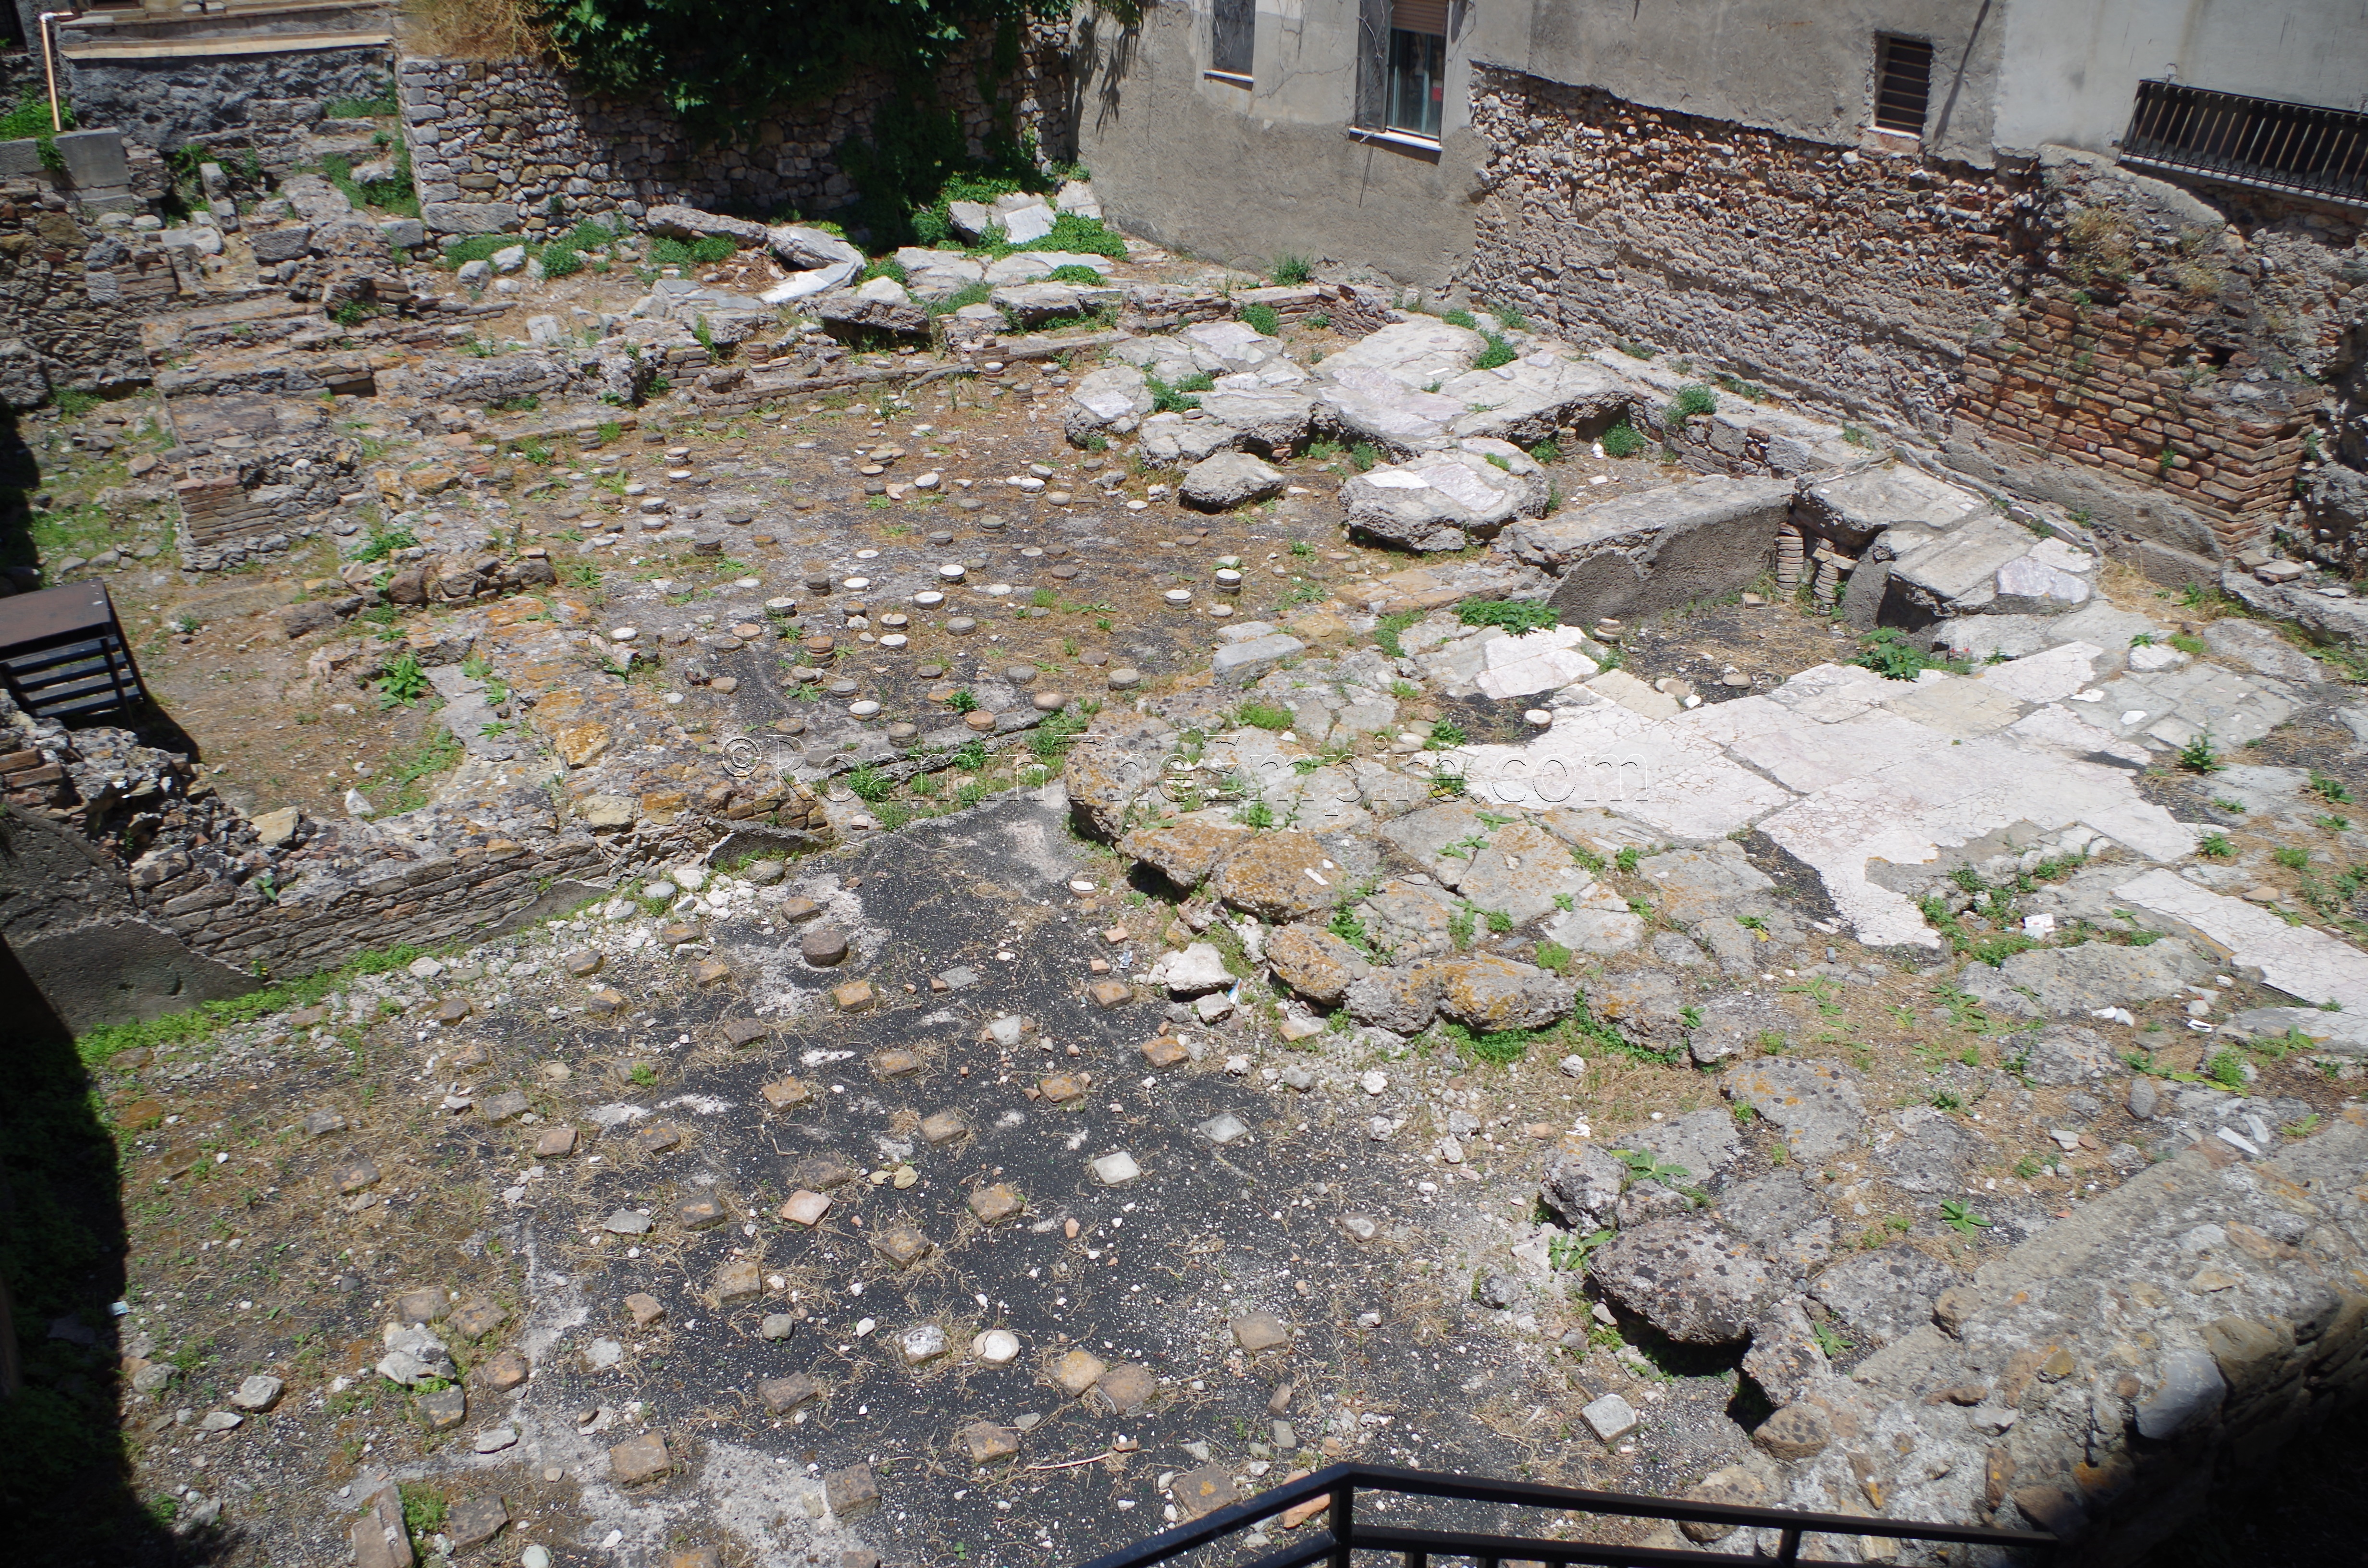 Warm rooms of the baths located near the forum area of Tauromenium.